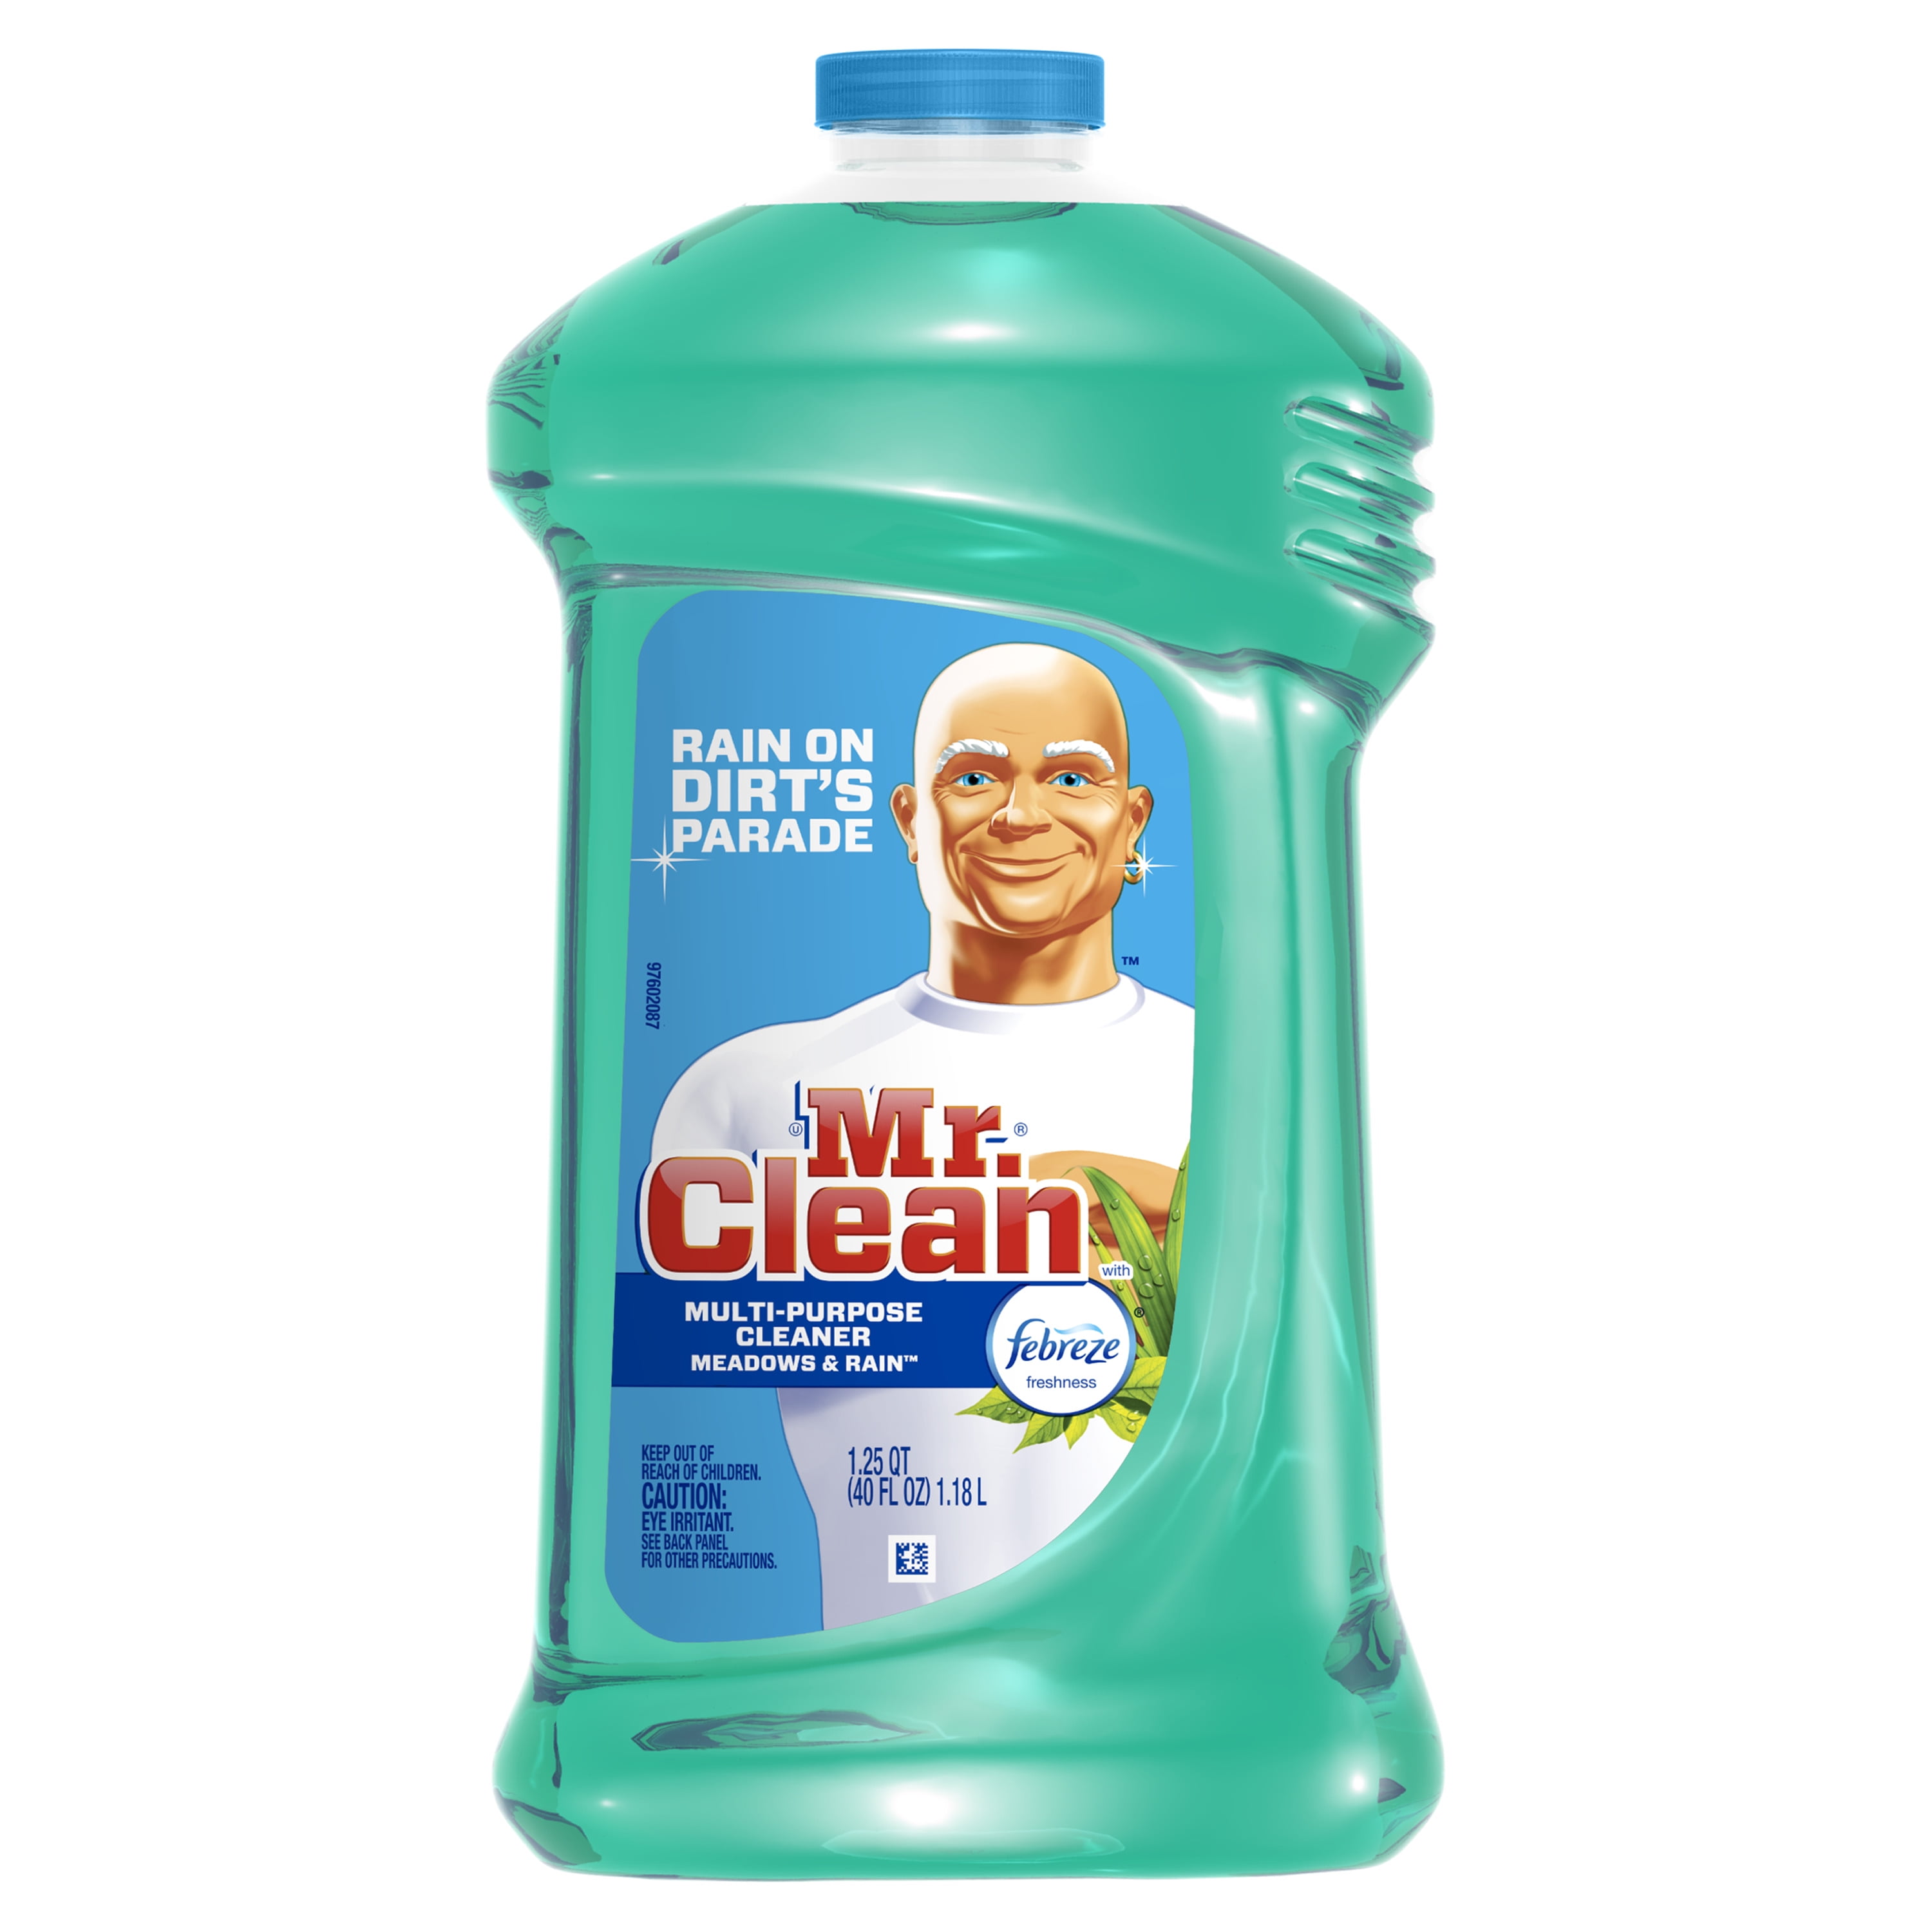 Clothes Cleaner